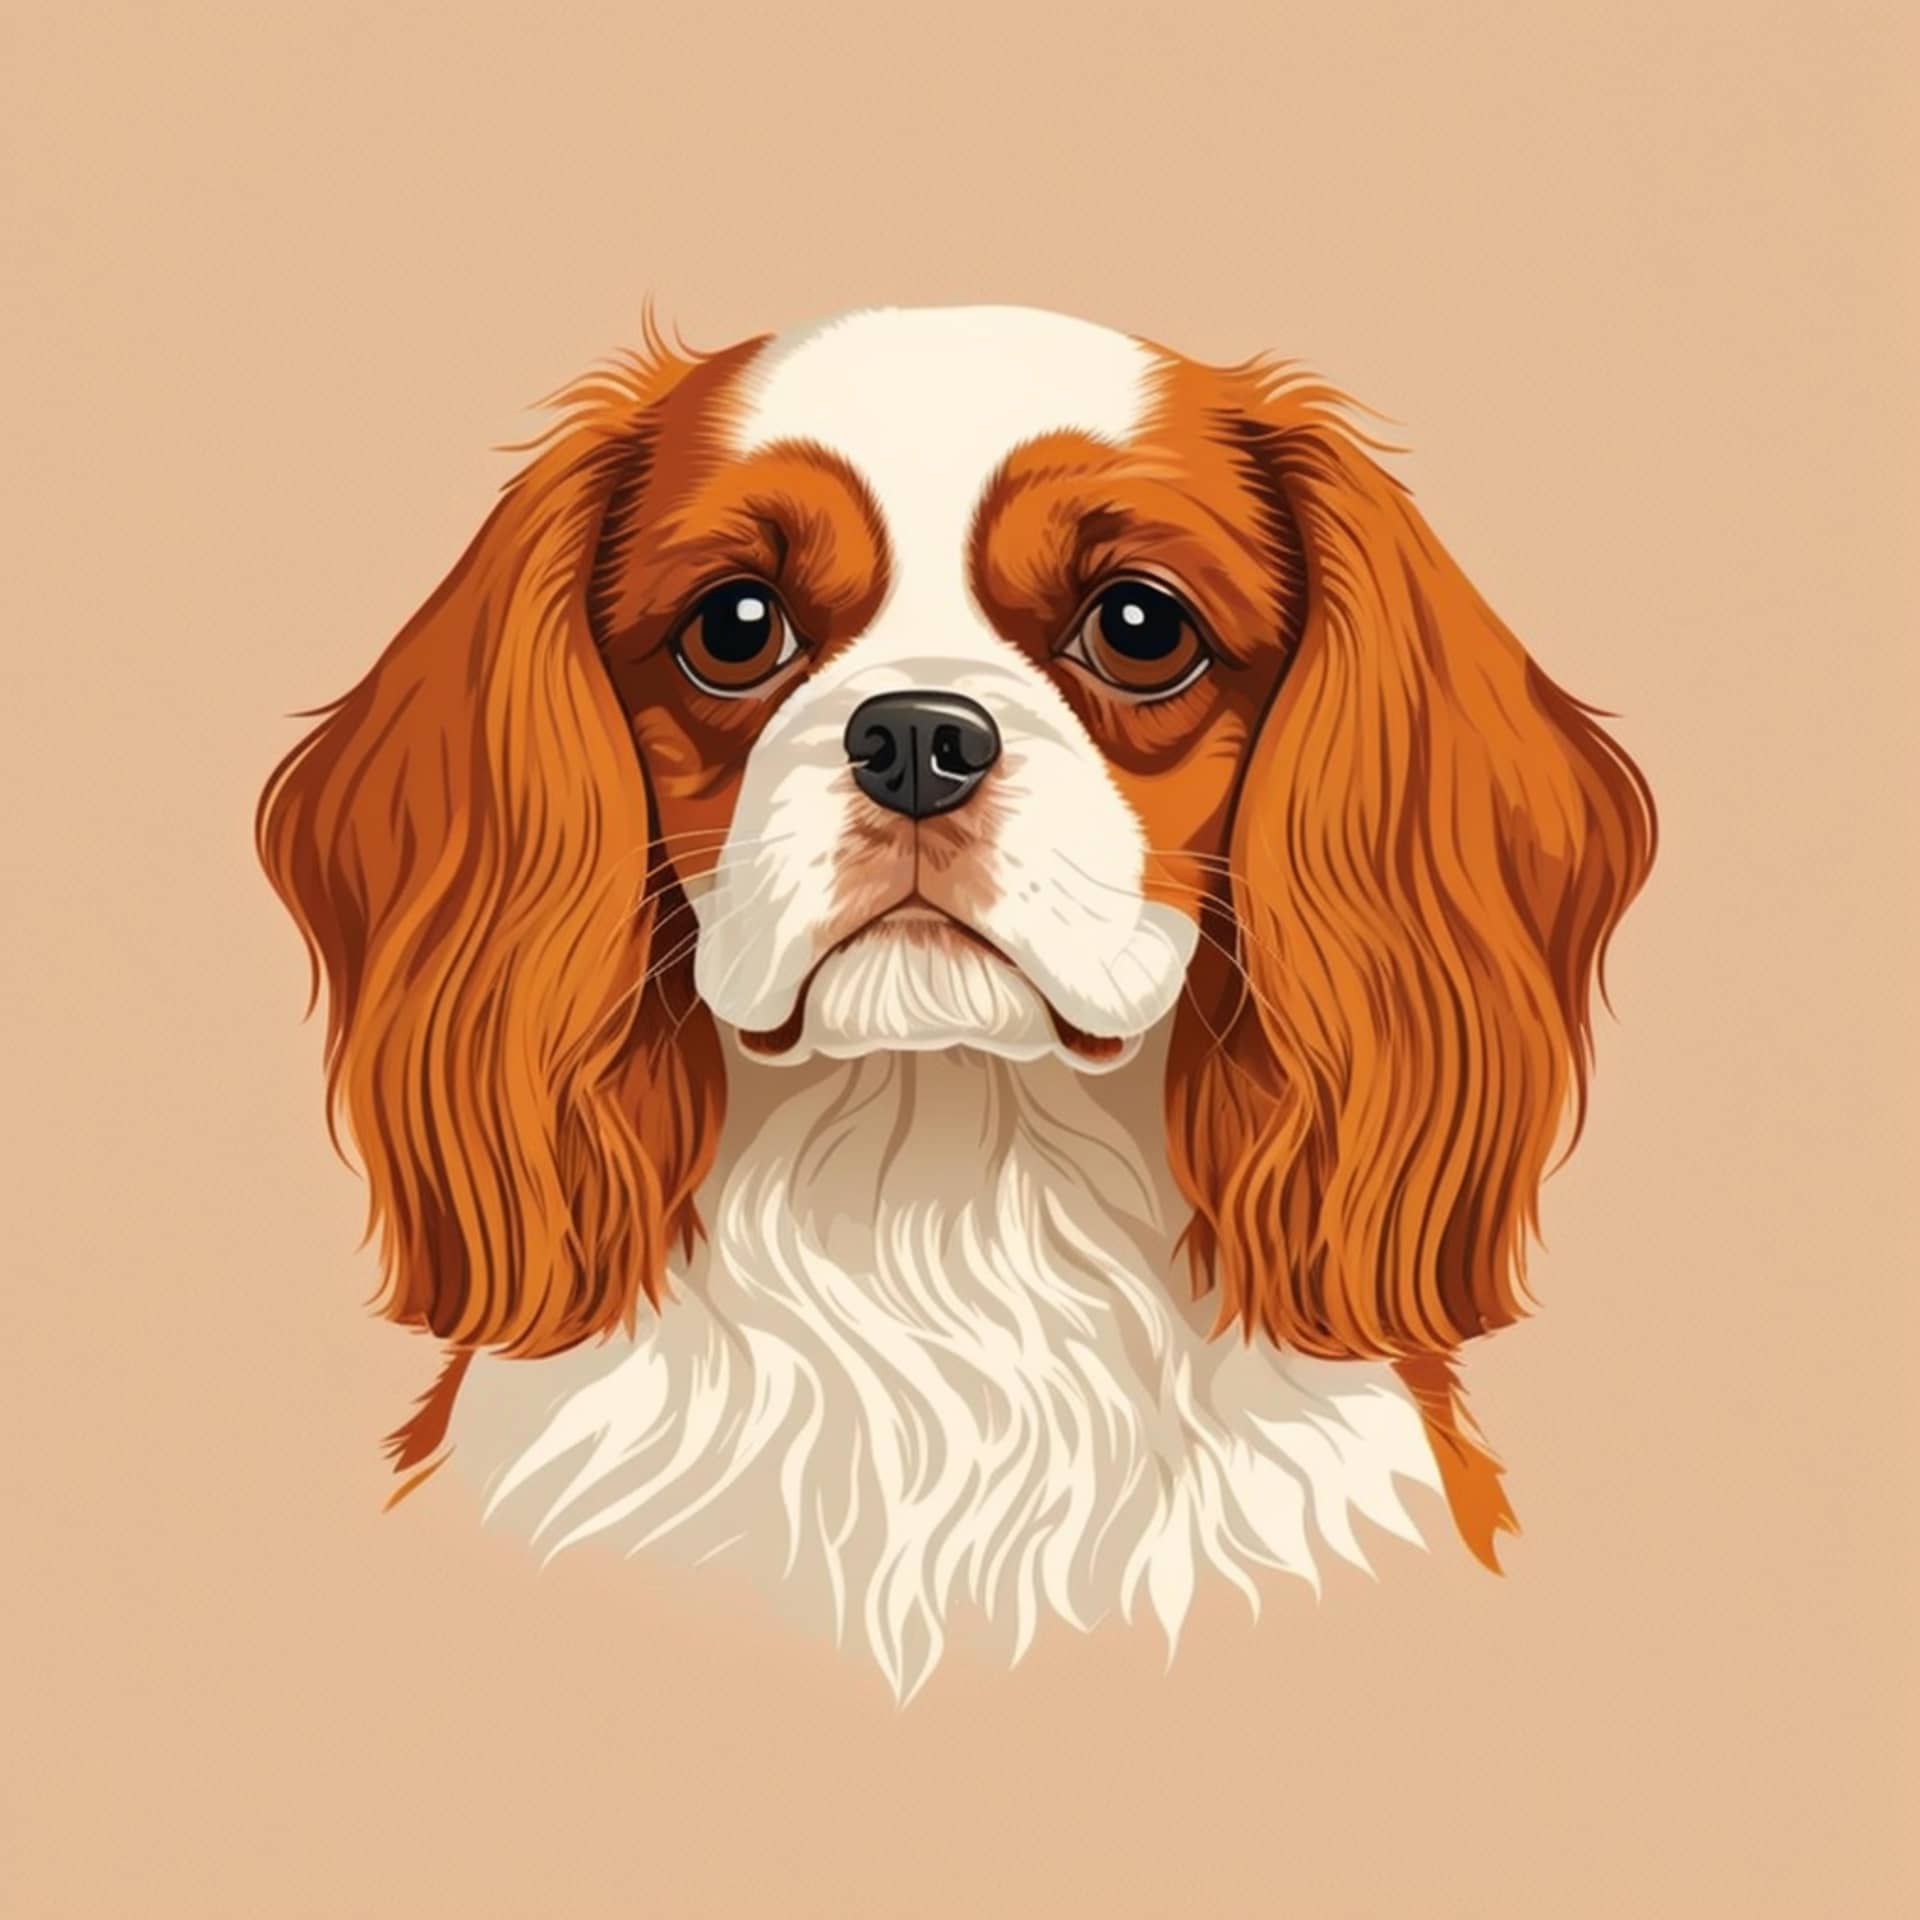 Cute dog cartoon profile pictures colorful image